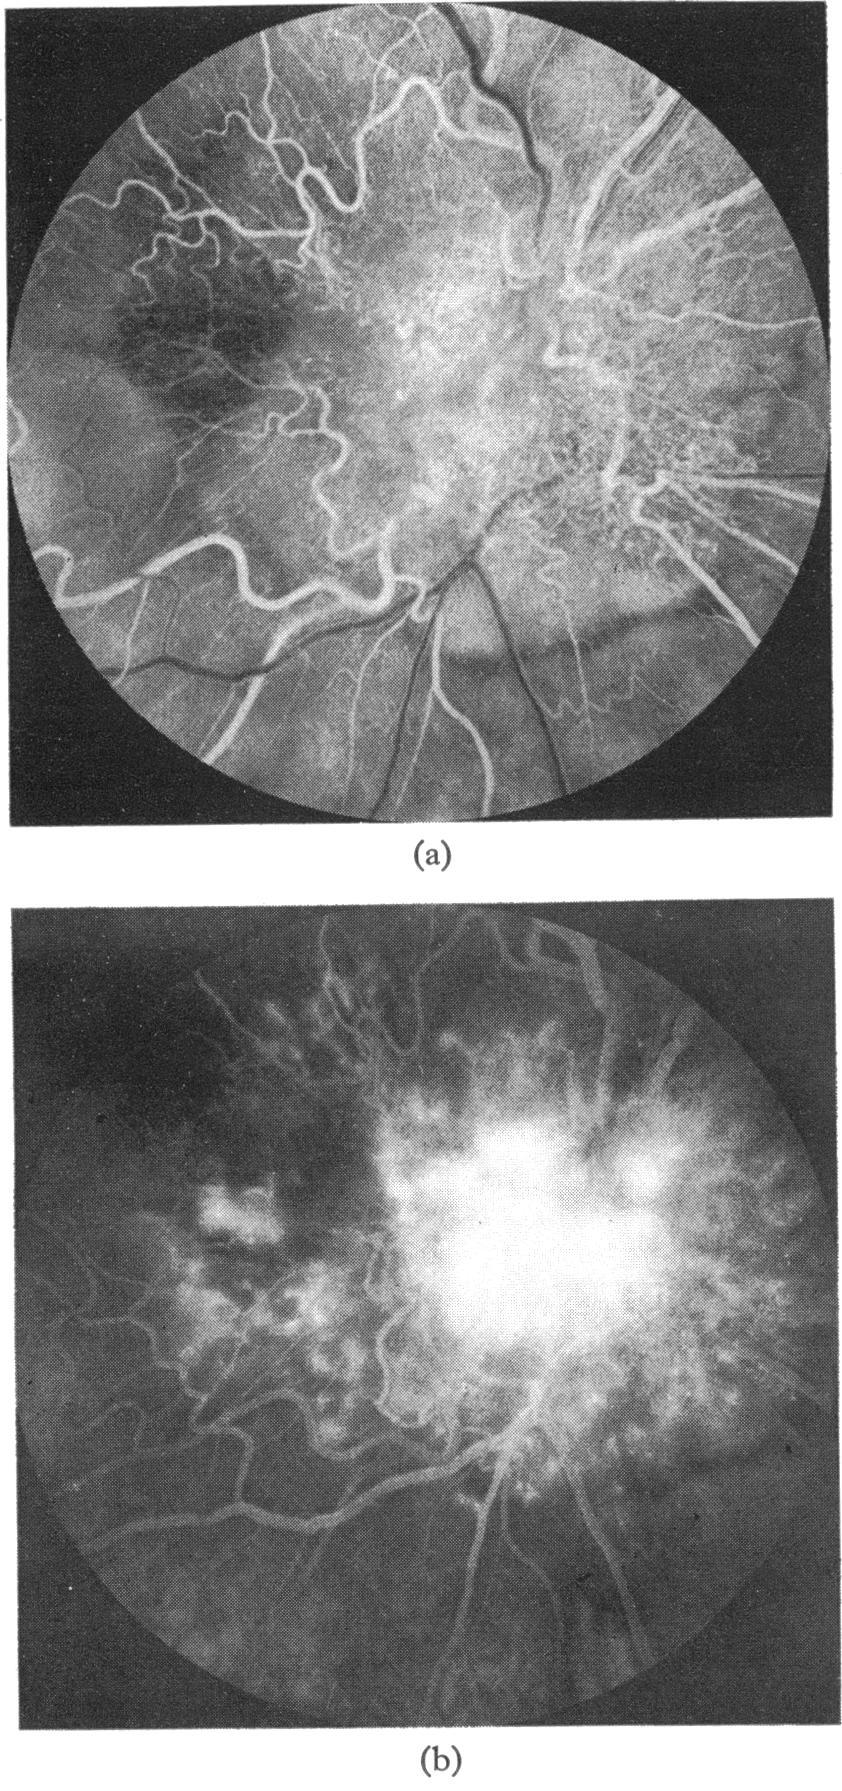 Although the mass appeared flatter than on presentation pigmentation of the retina continued to progress.